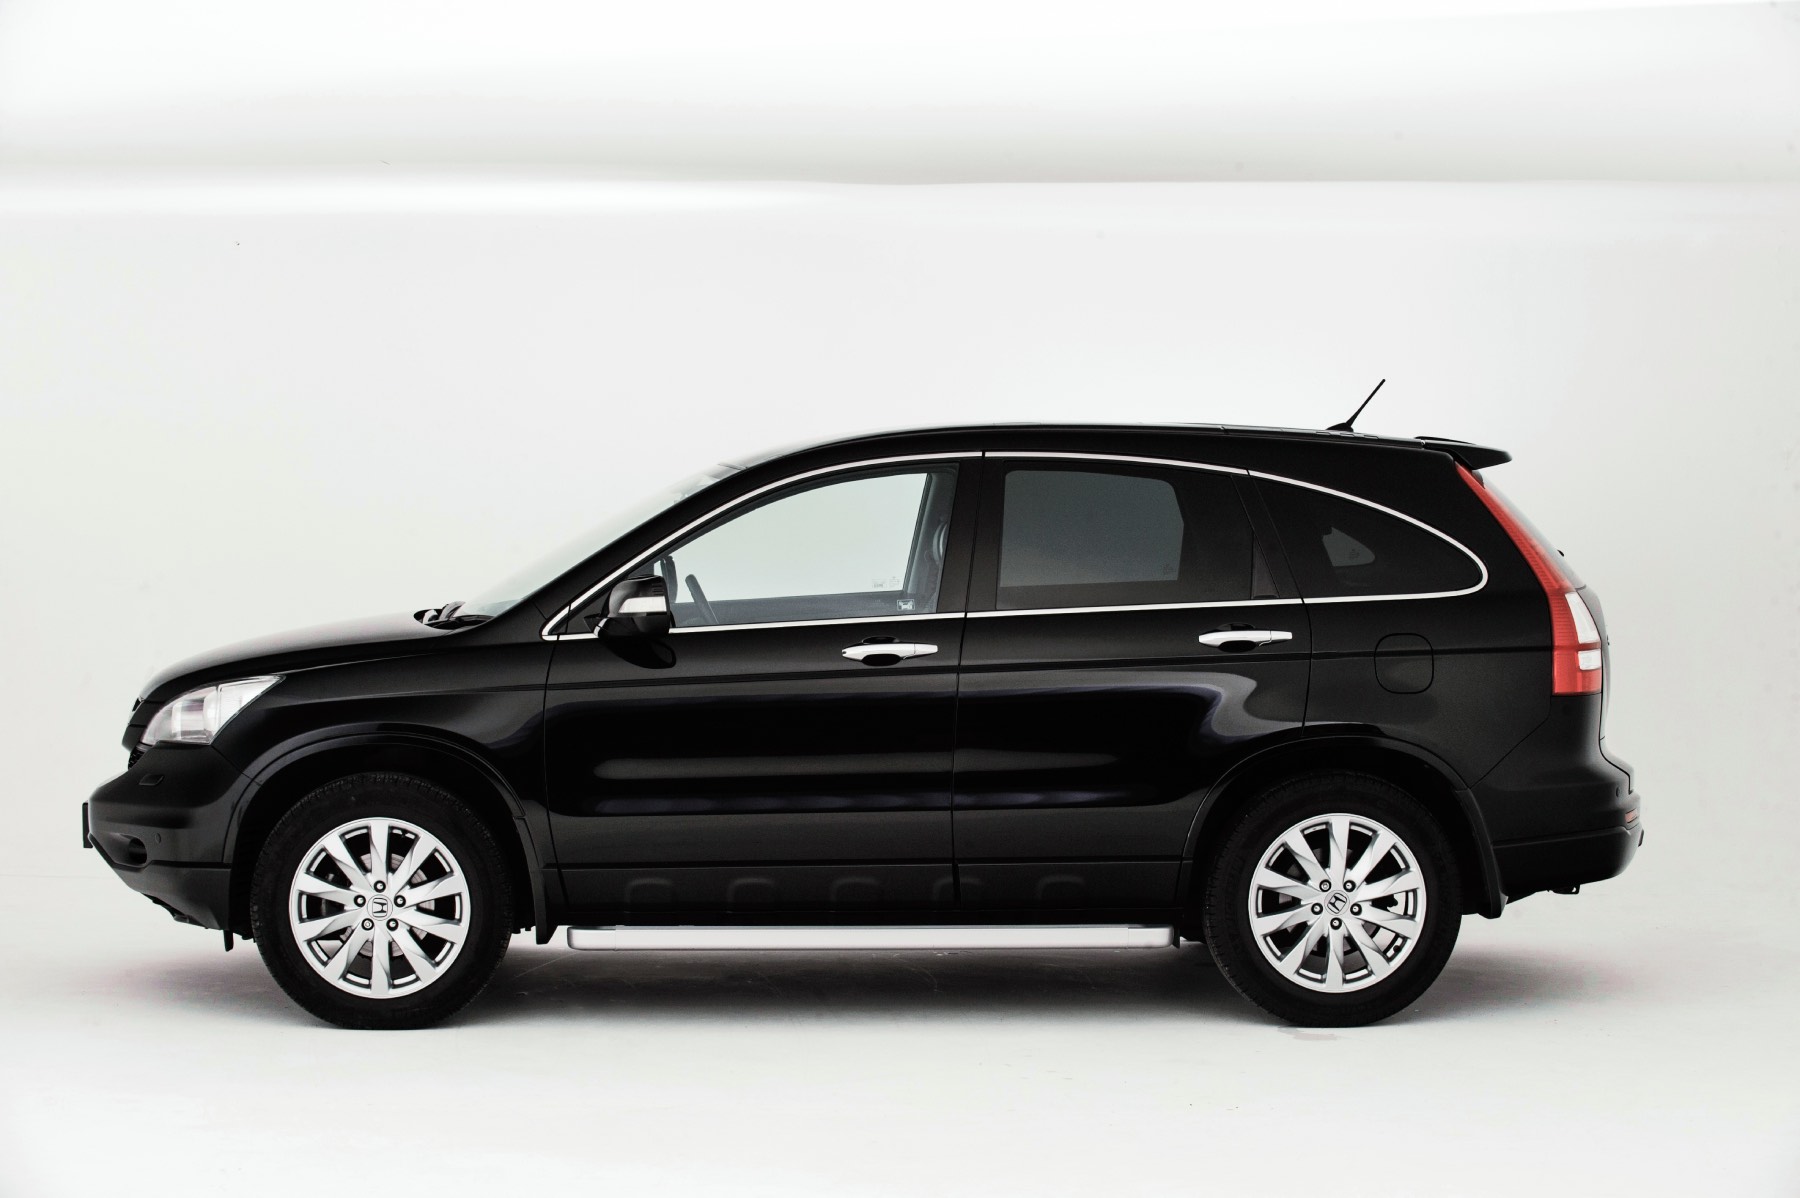 Side view of a second-generation Honda CR-V on a white backdrop.